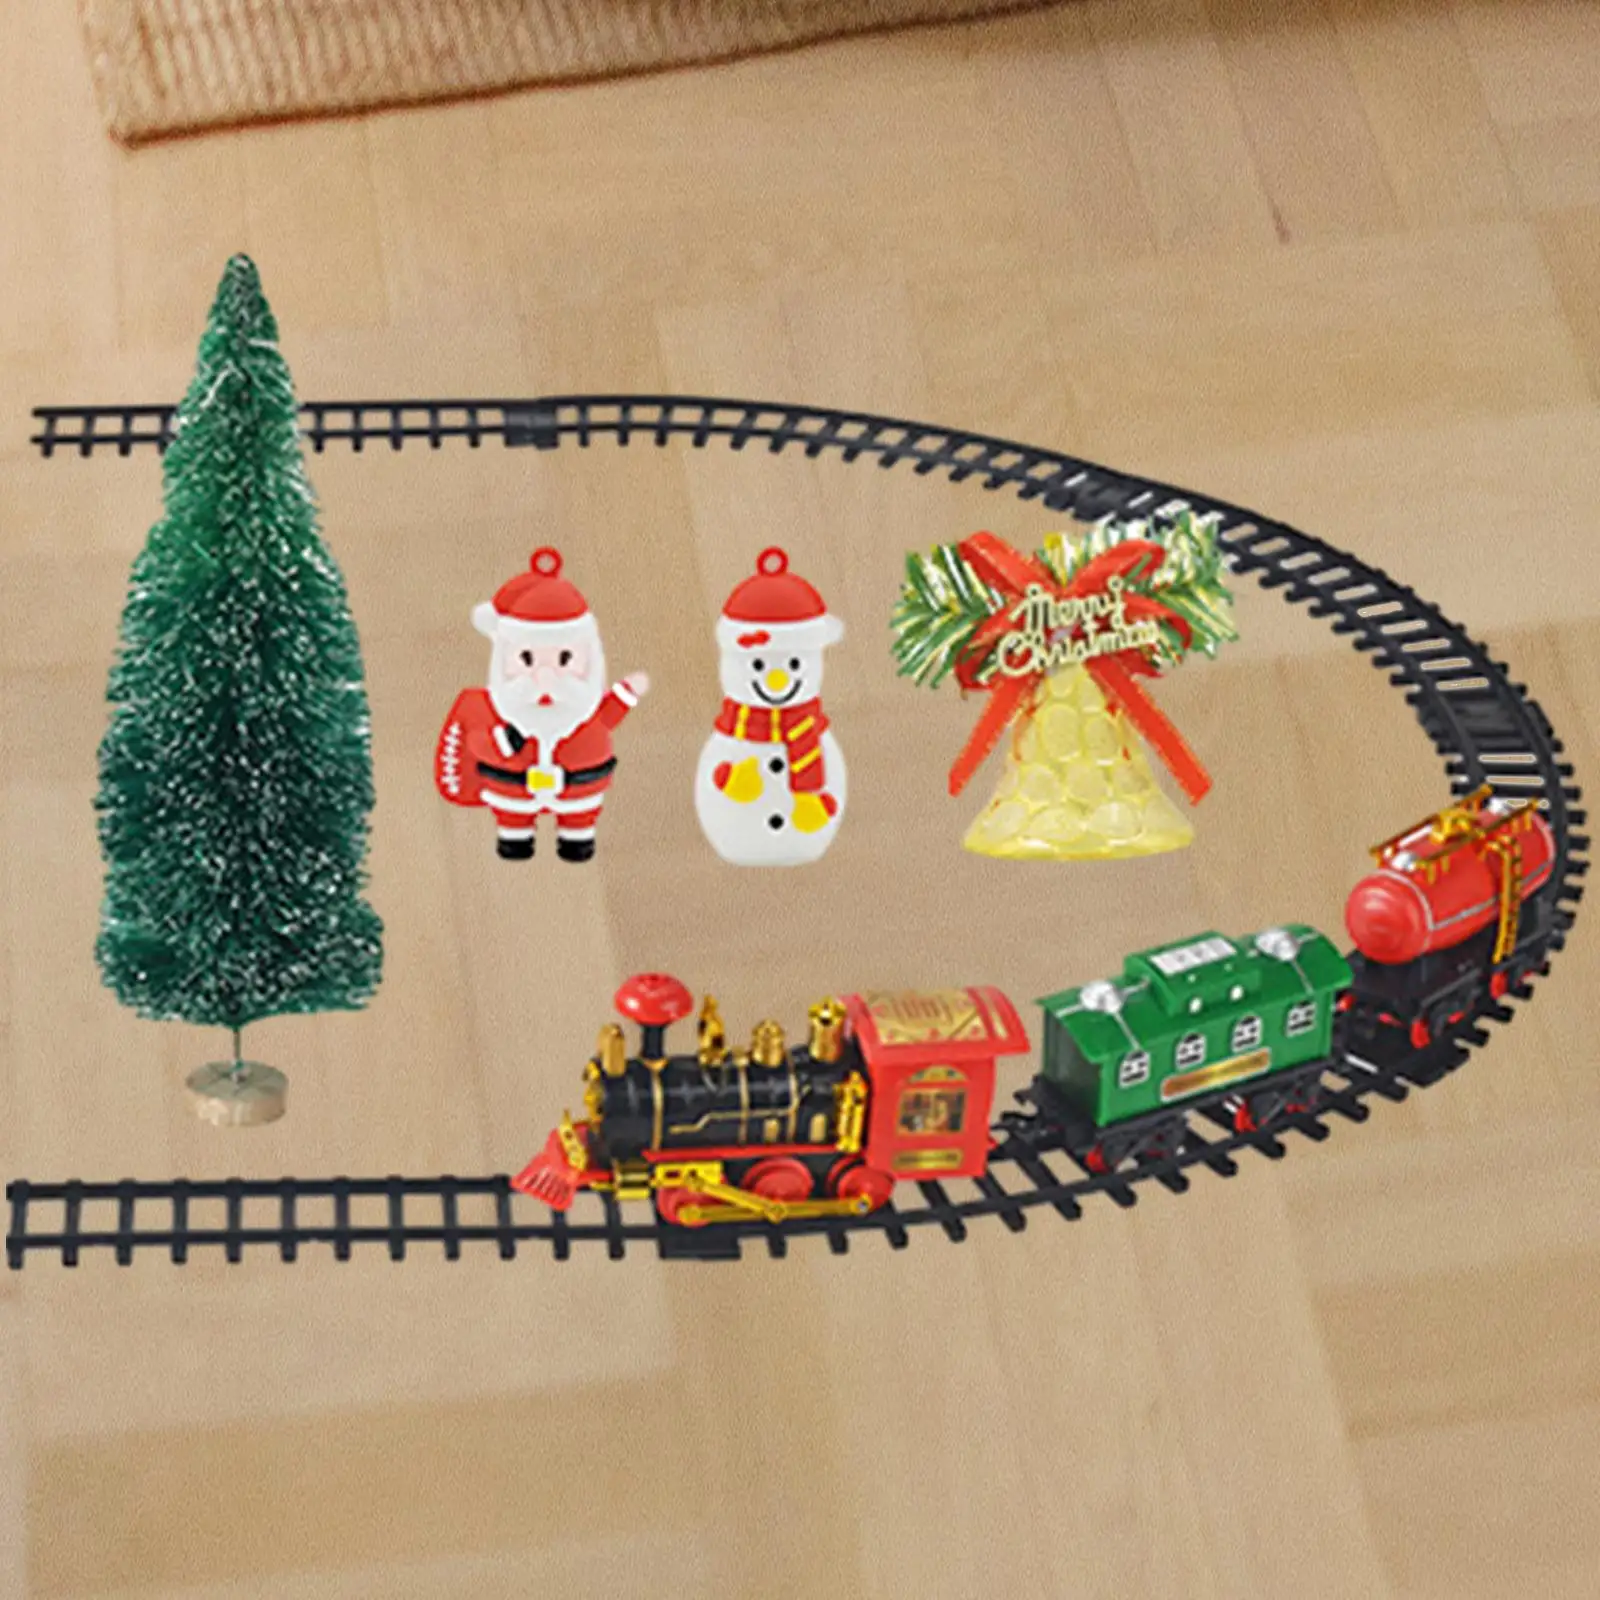 Kids Electric Train Set Christmas Train Carriages Tracks Battery Powered DIY Electric Train Tracks for Boys Girls Birthday Gifts